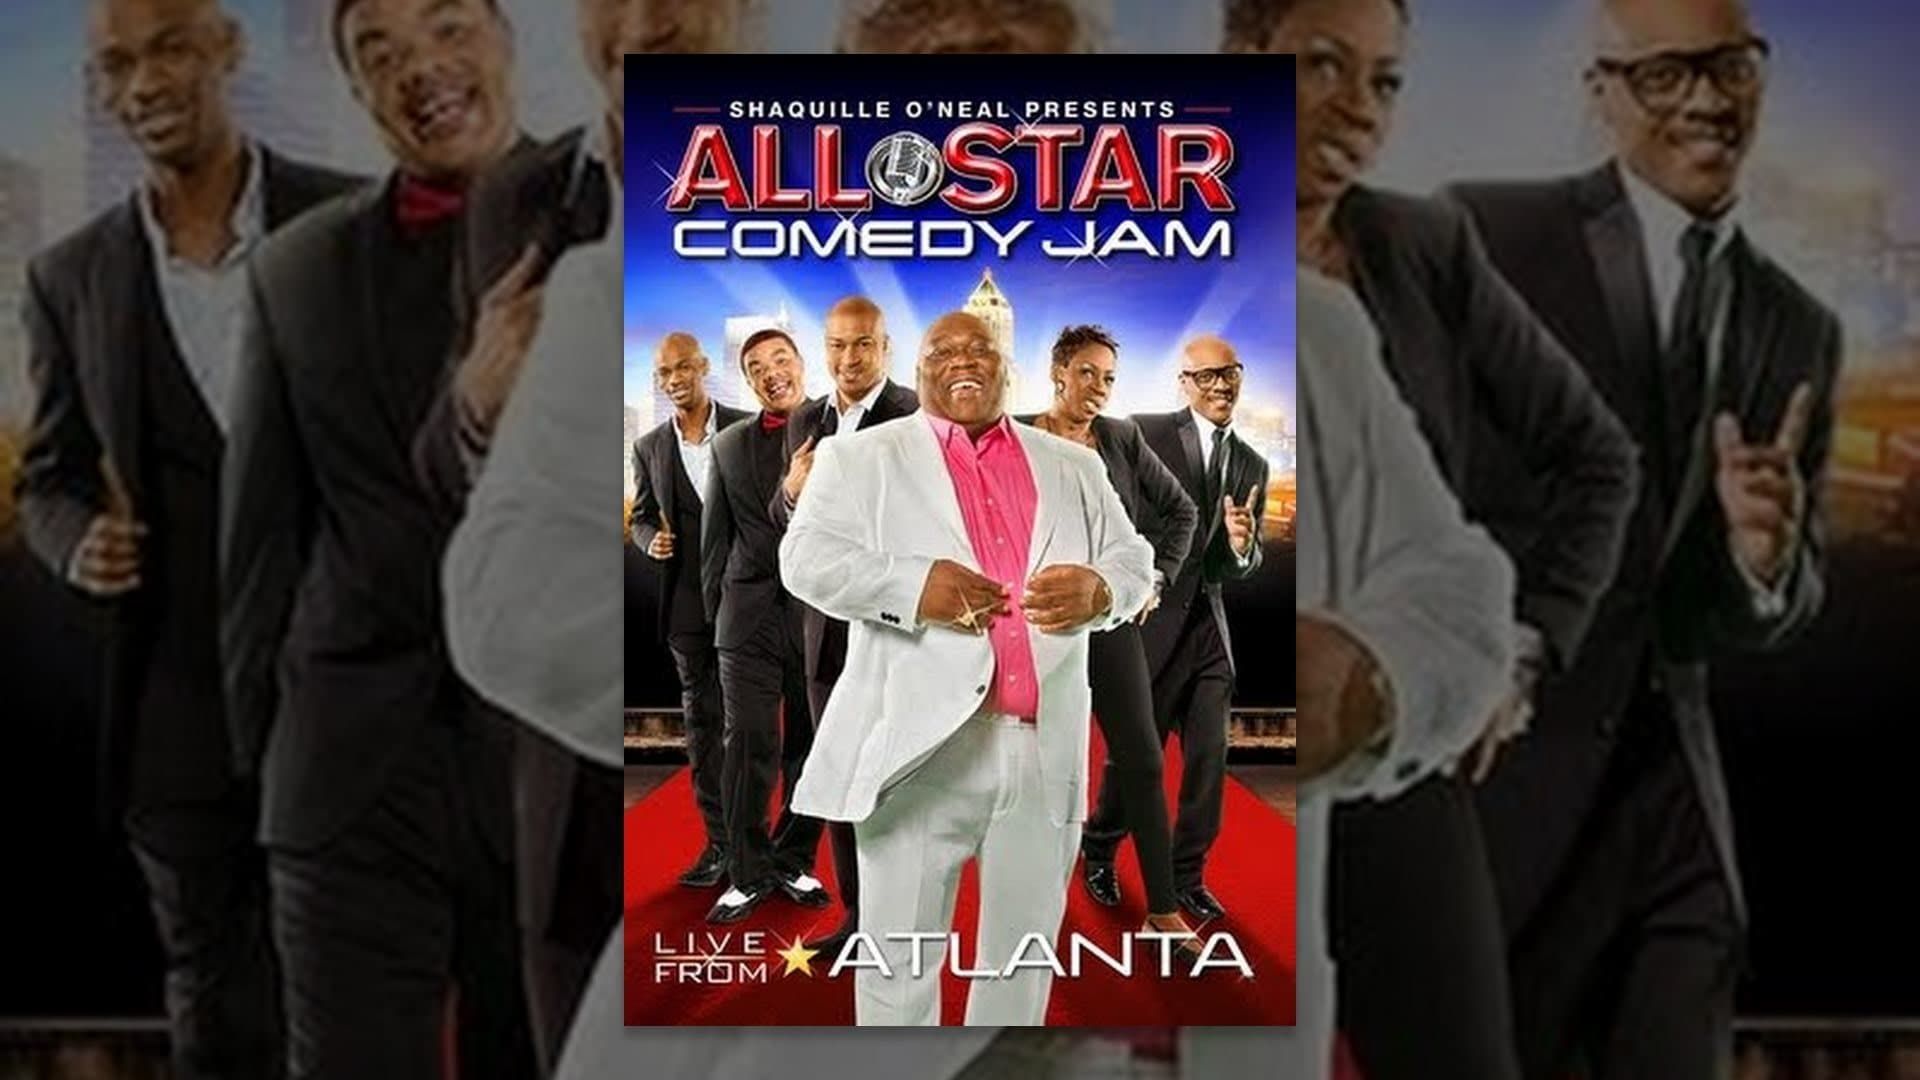 Shaquille O'Neal Presents: All Star Comedy Jam - Live from Atlanta background